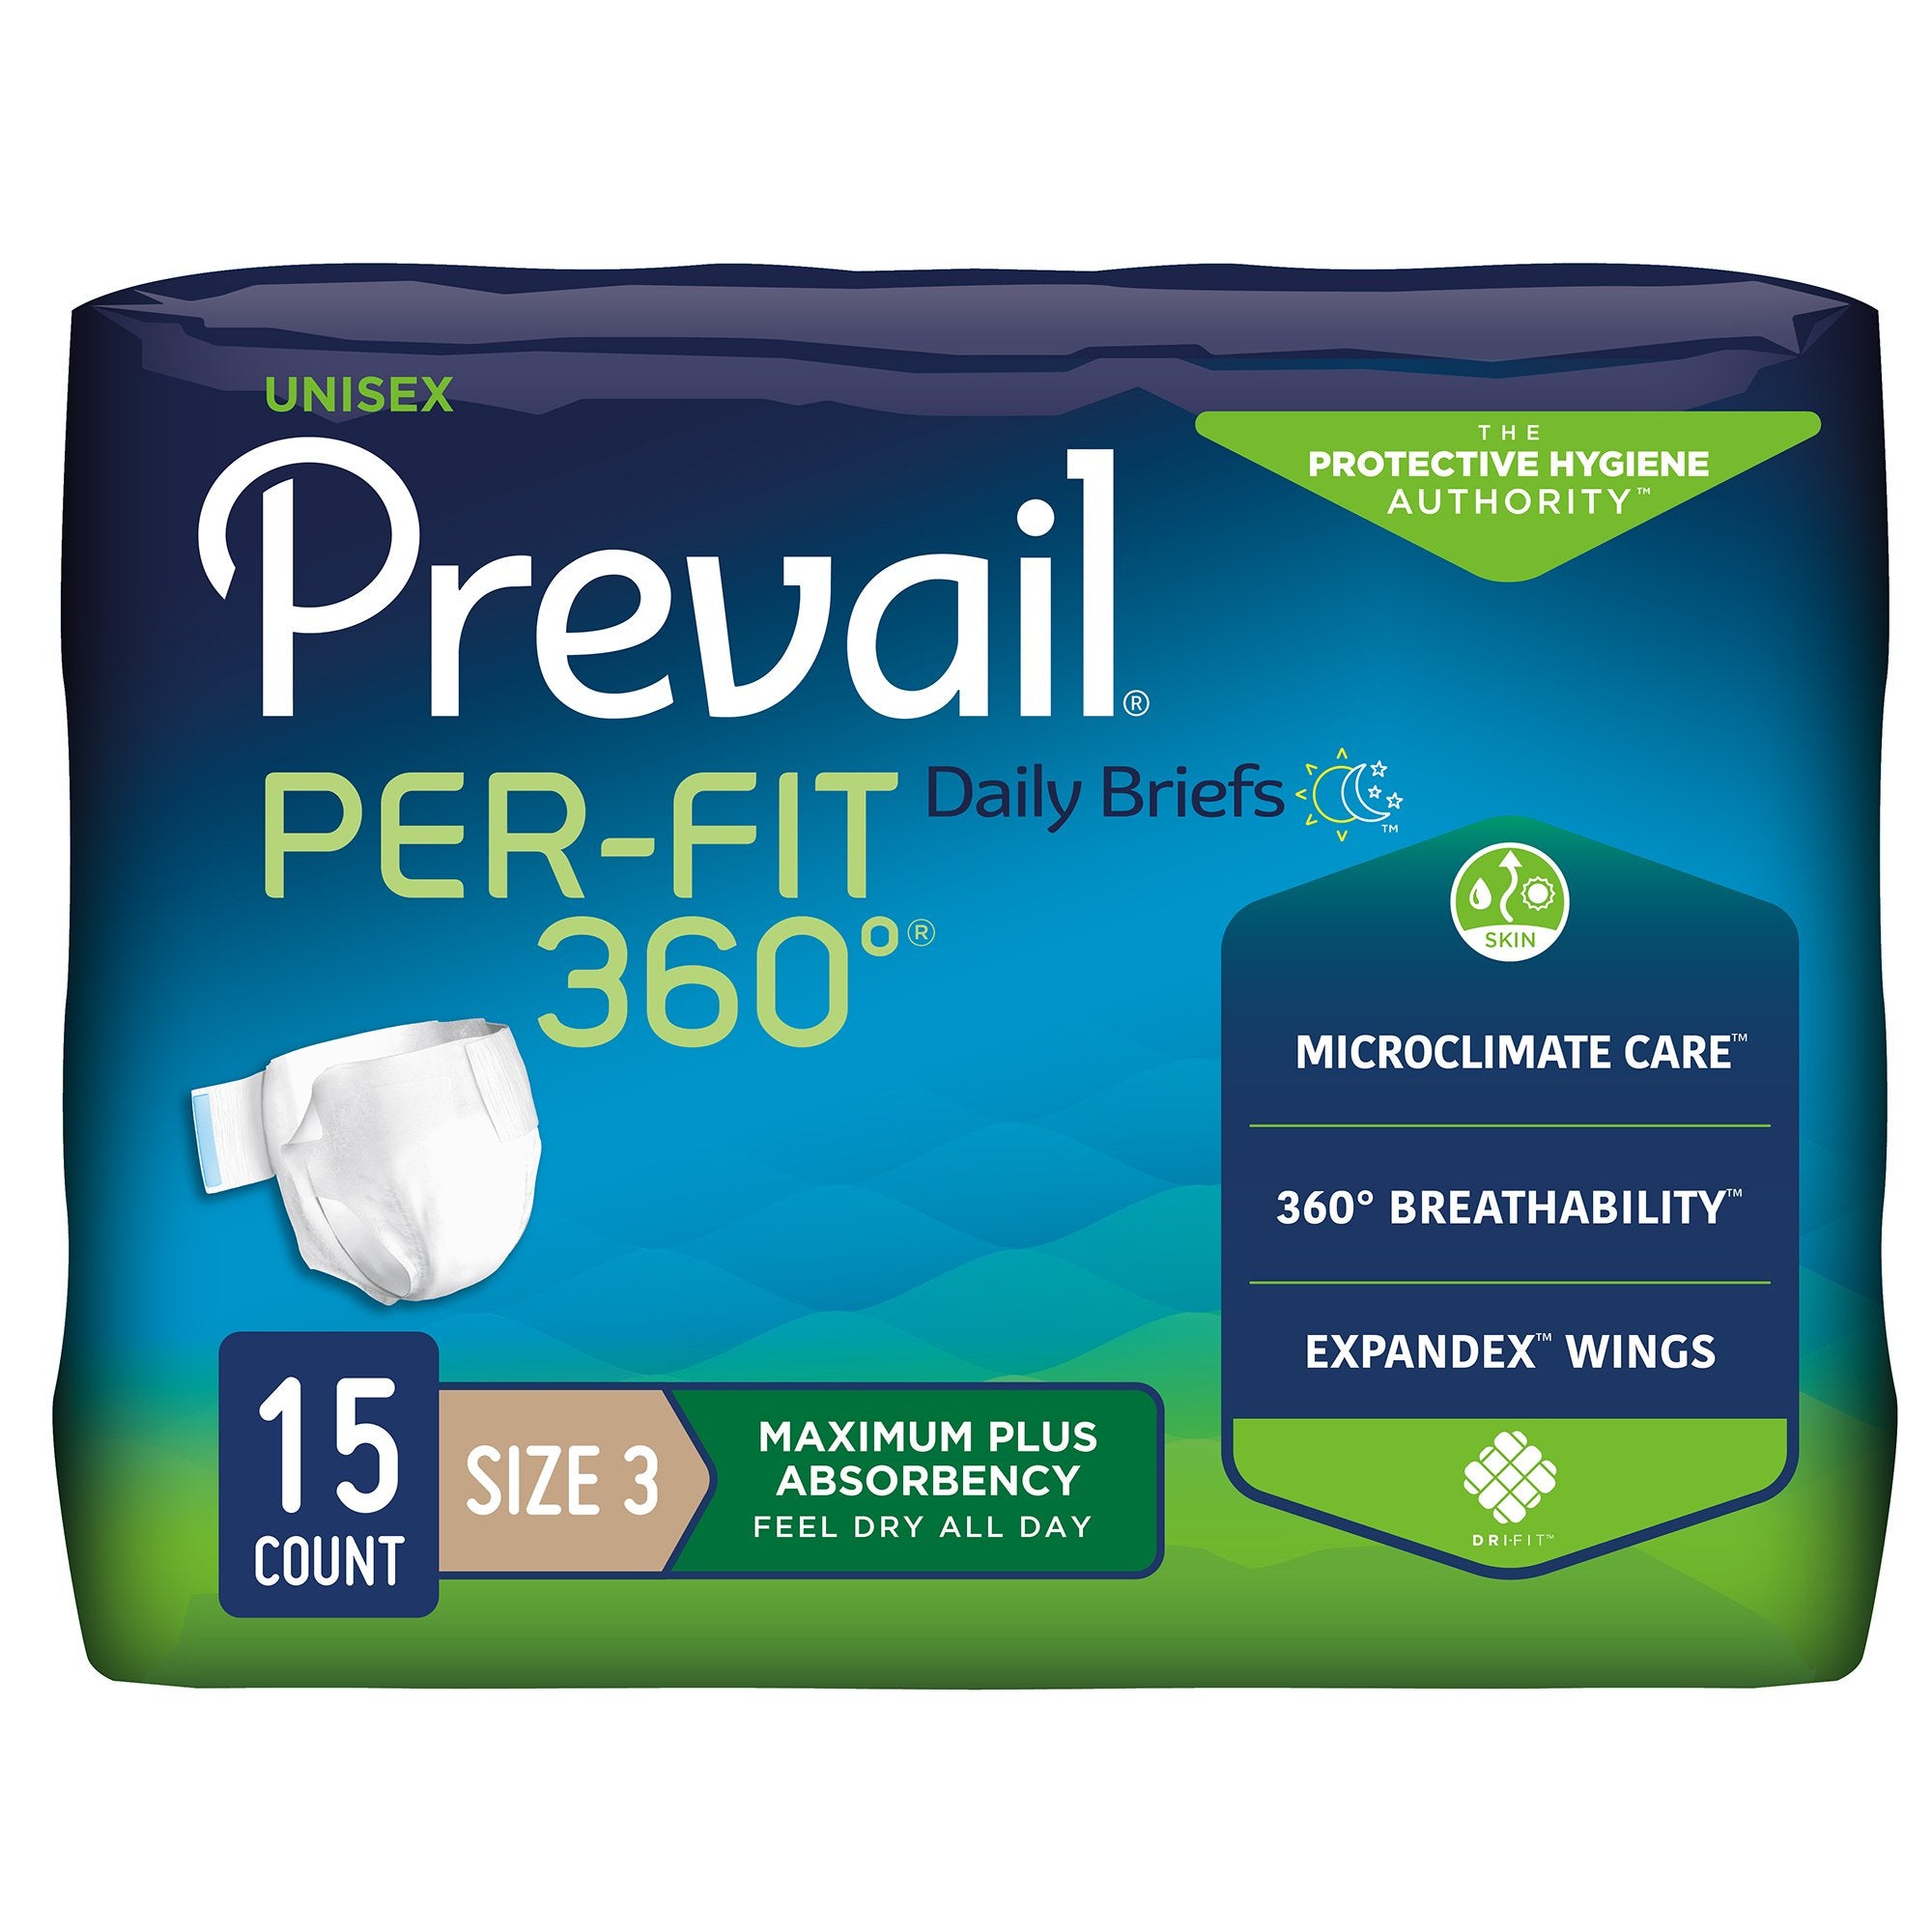 Prevail® Per-Fit 360° Daily Briefs, Max Plus Absorbency, Size 3 - 15 Pack